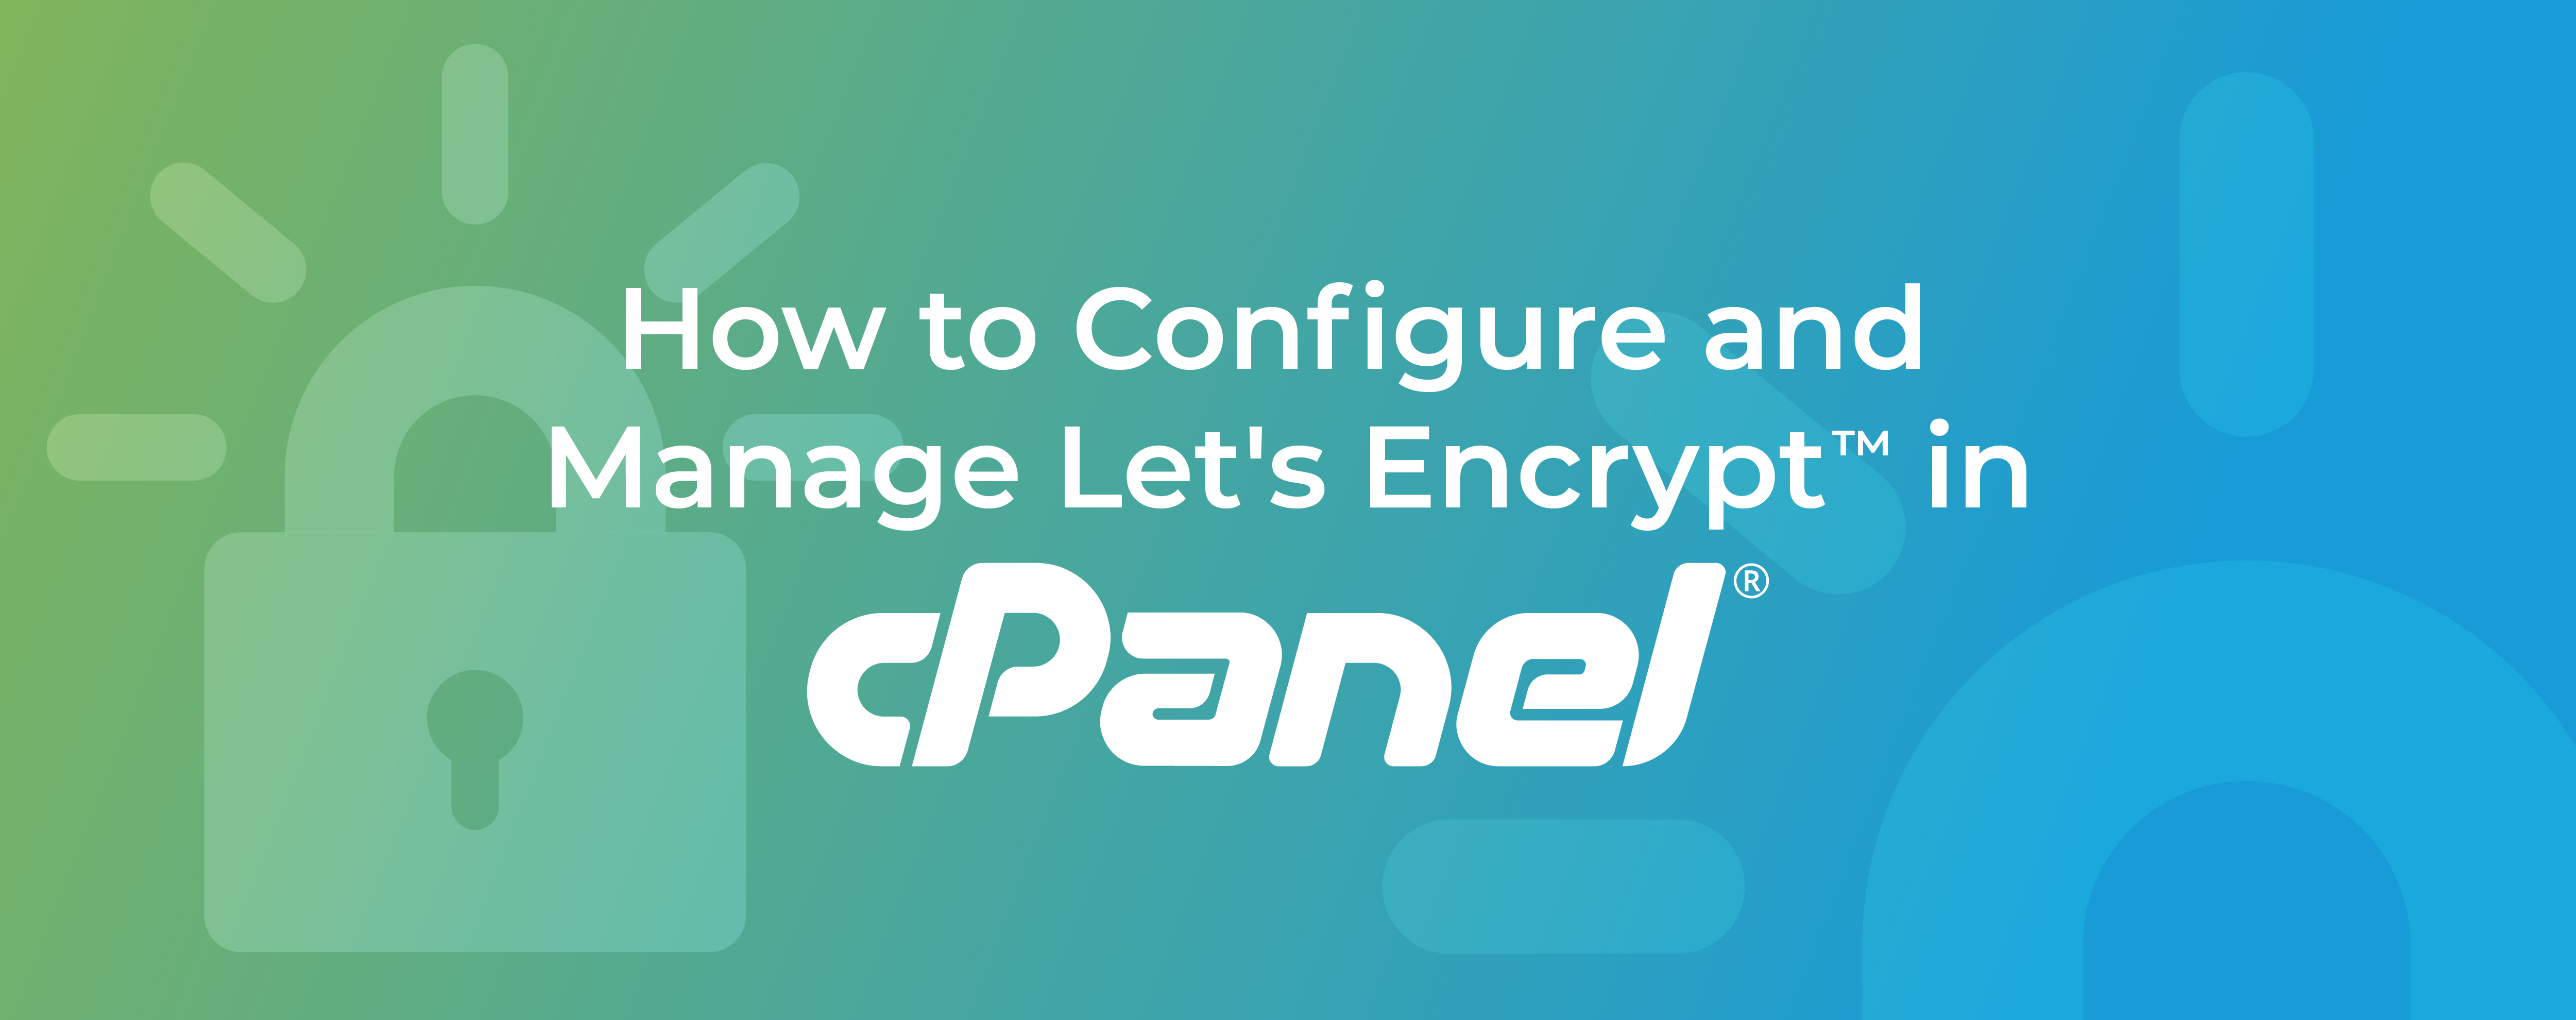 How to Configure and Manage Let’s Encrypt in cPanel